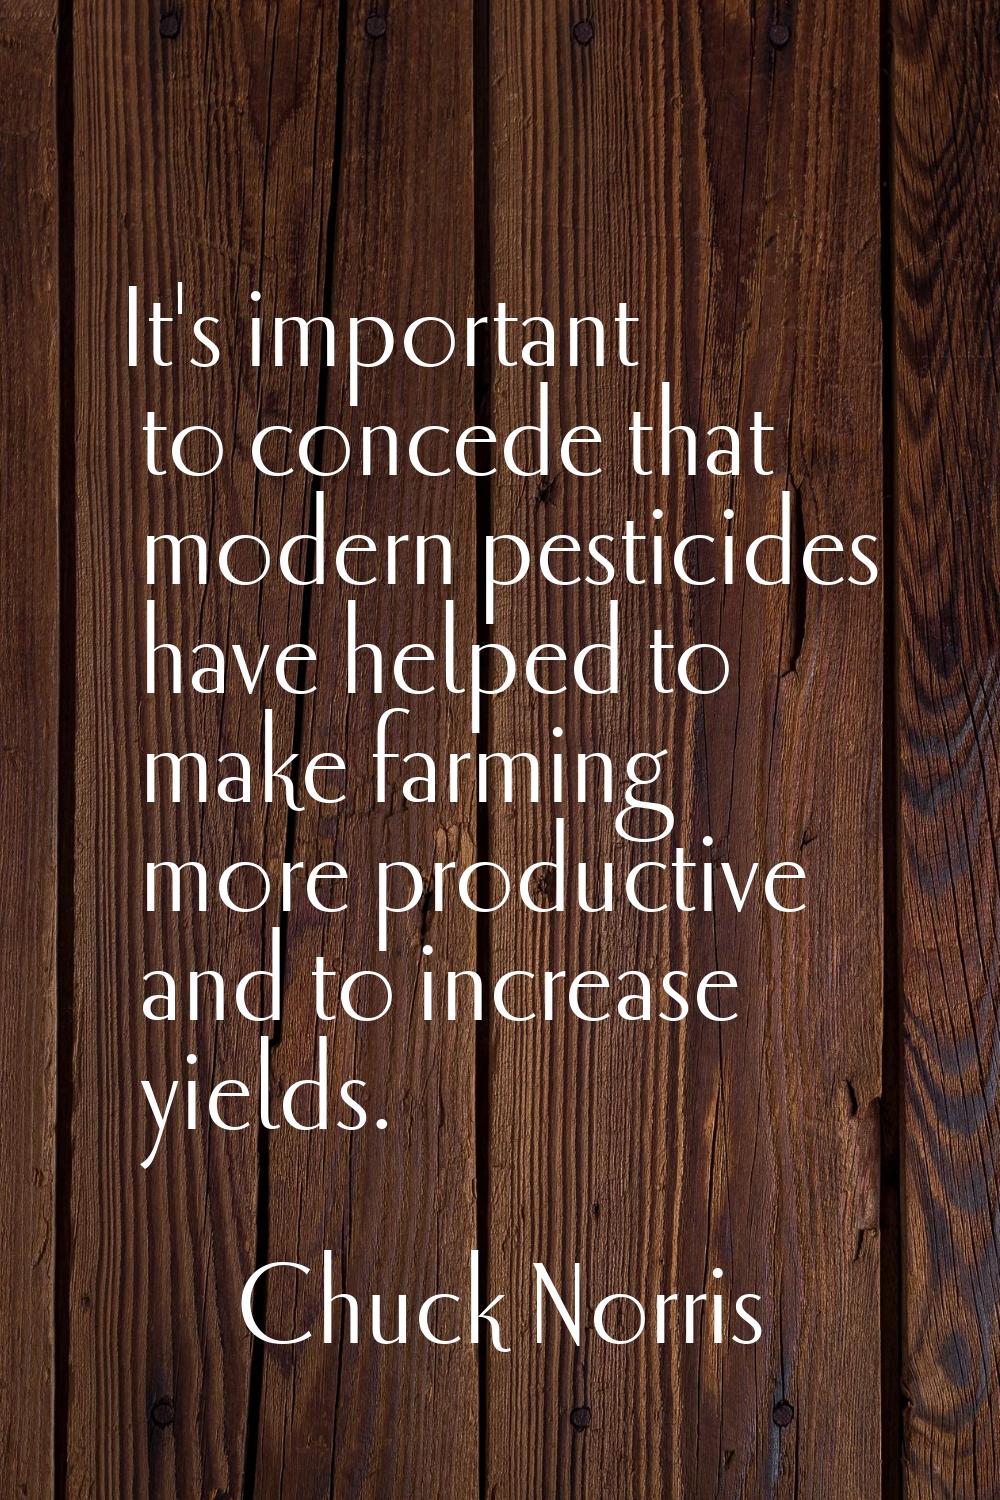 It's important to concede that modern pesticides have helped to make farming more productive and to